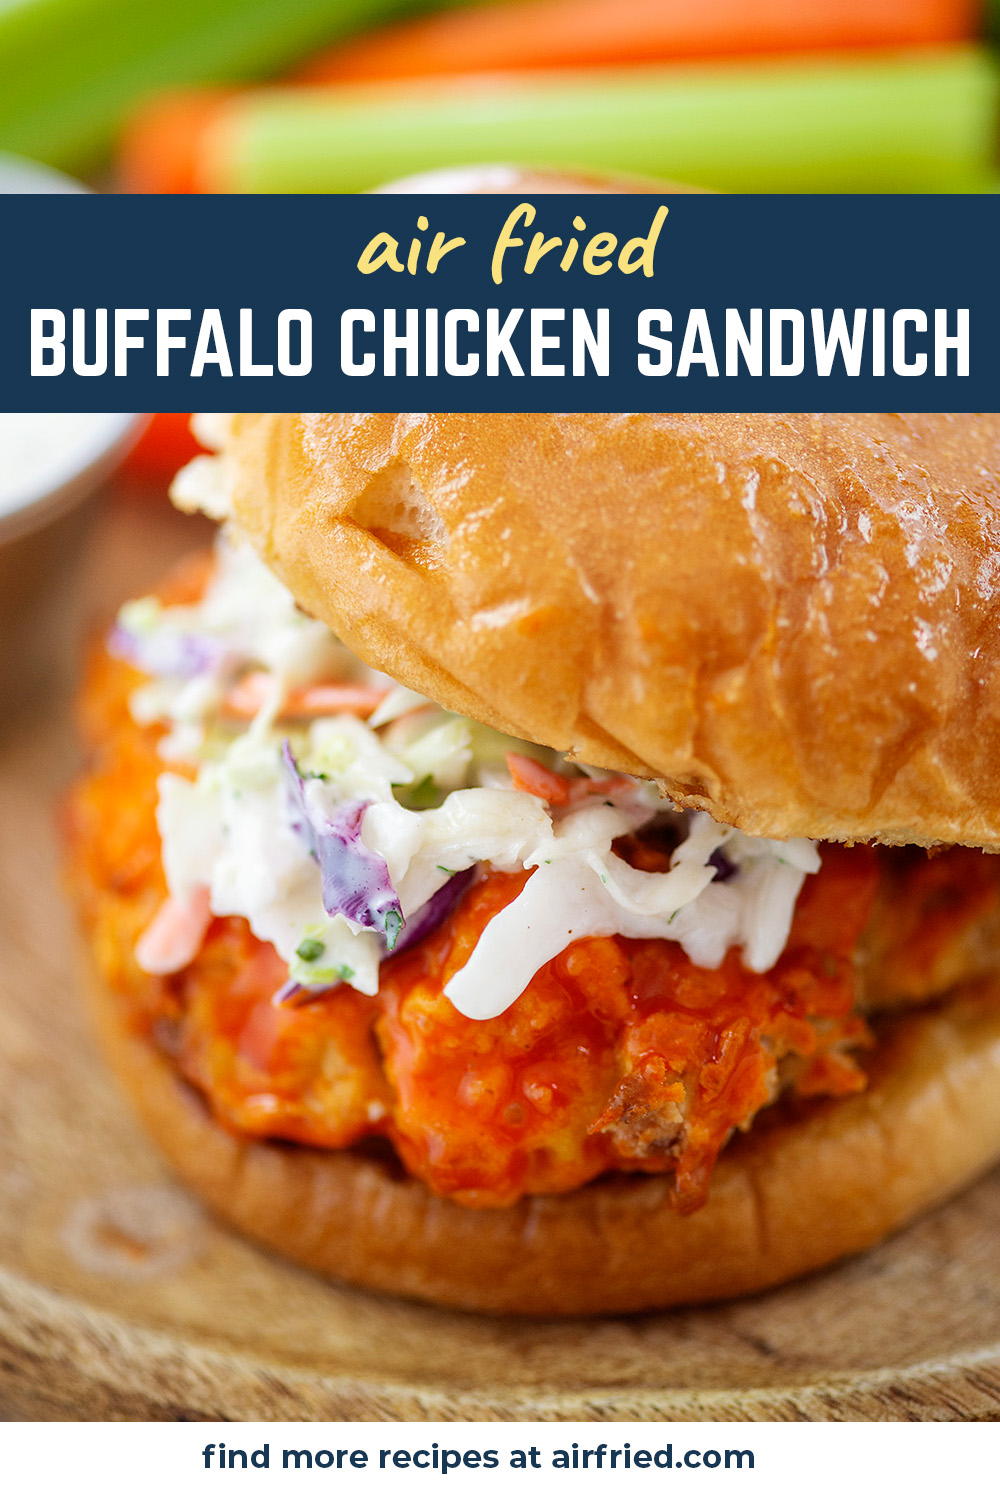 Our air fryer buffalo chicken sandwich is topped with a cool, creamy ranch slaw!